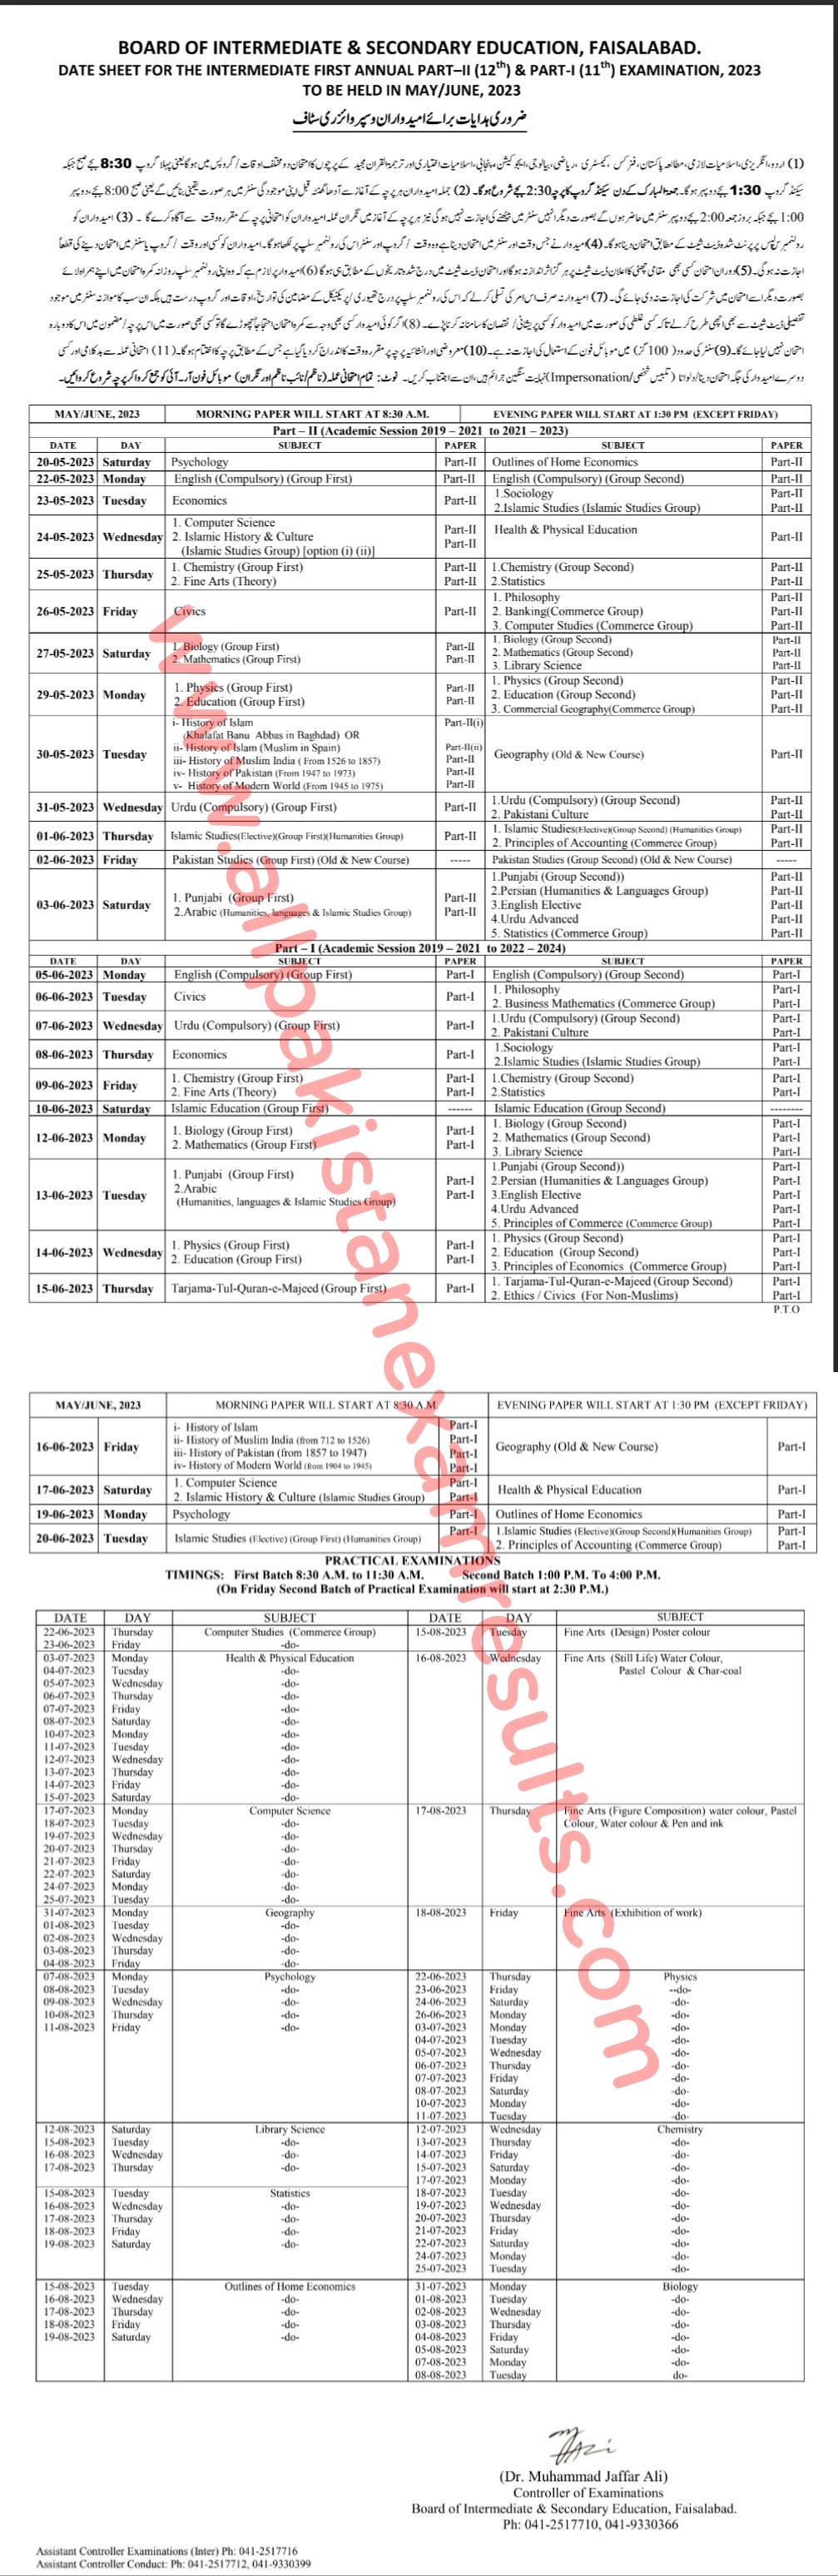 BISE Faisalabad 11th & 12th Class Date Sheet 2023 1st Annual